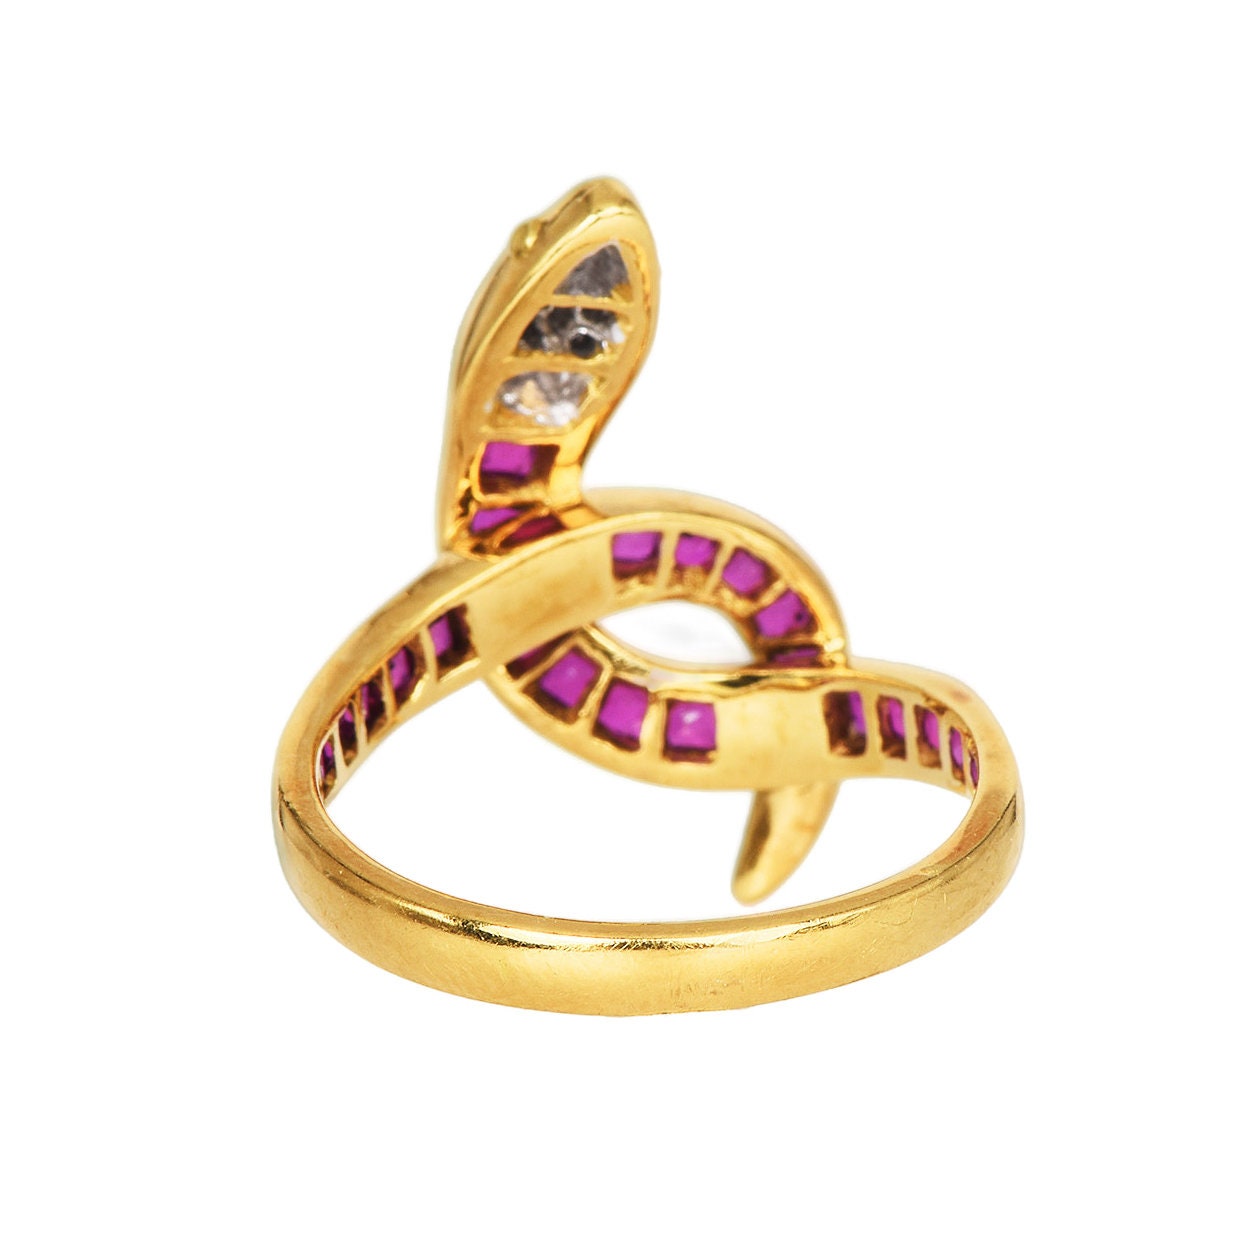 Vintage 18K Yellow Gold Diamond and Ruby Snake Ring